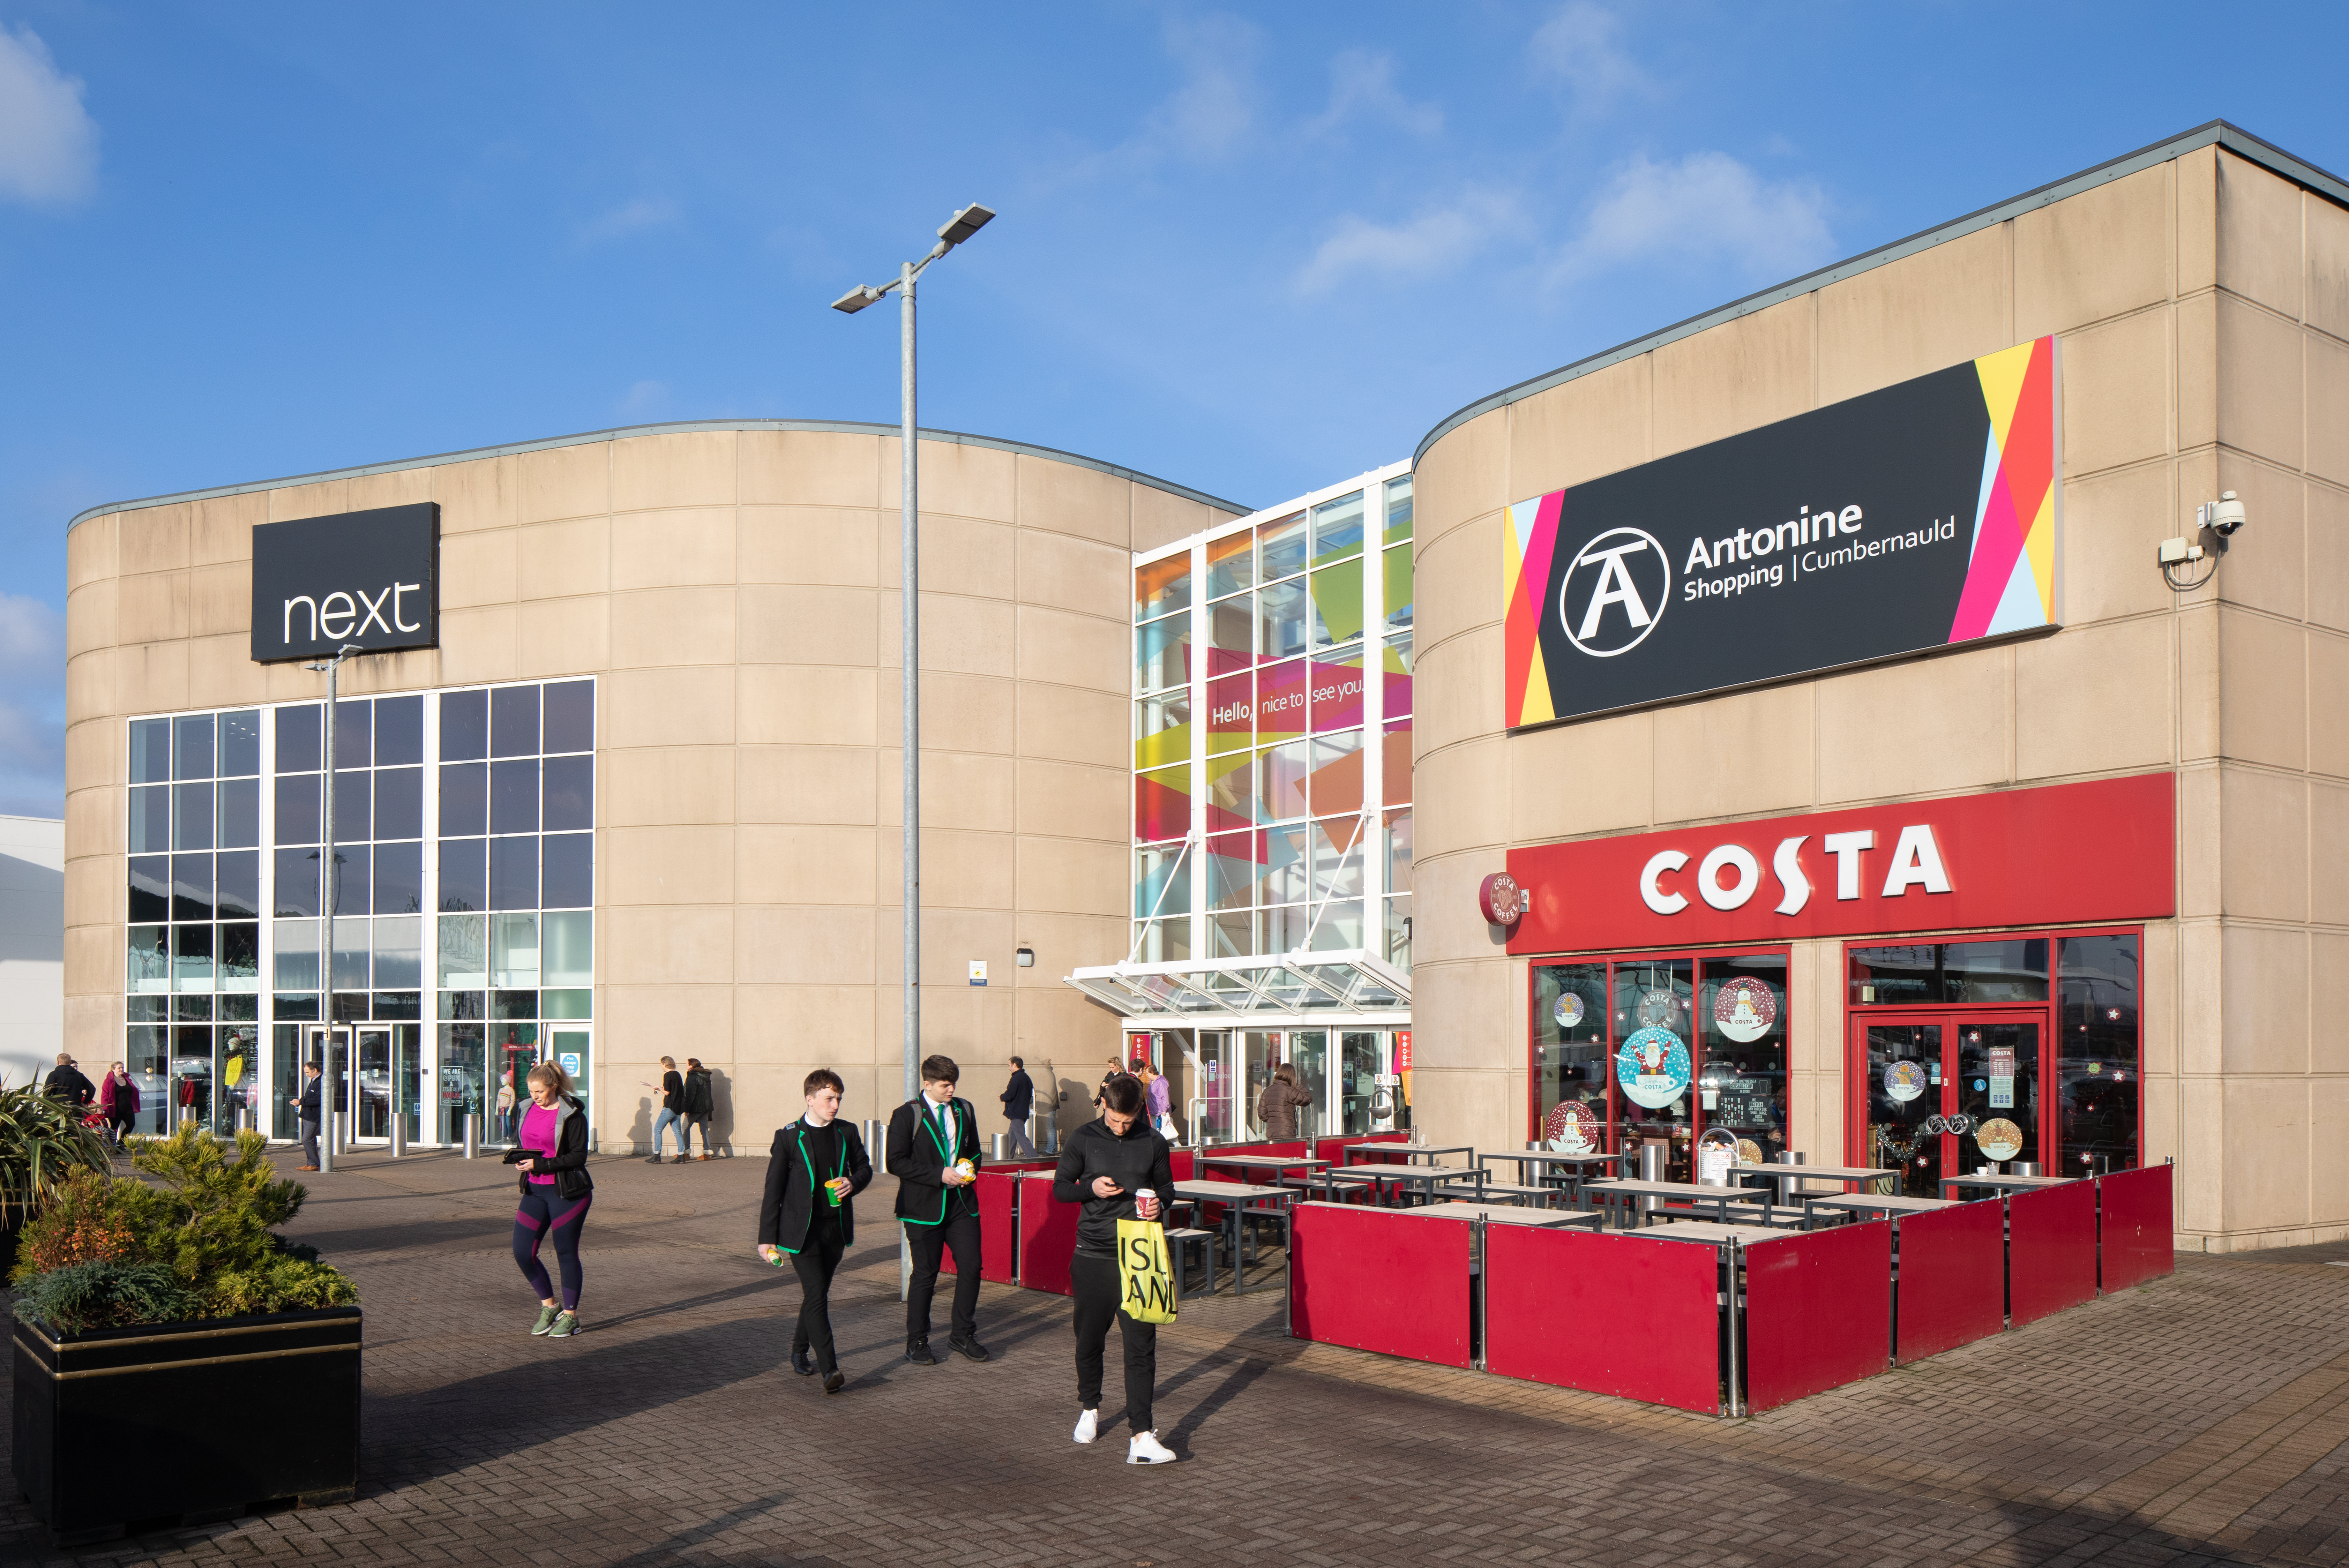 Scoop announces three new lettings at The Antonine Shopping Centre in Cumbernauld